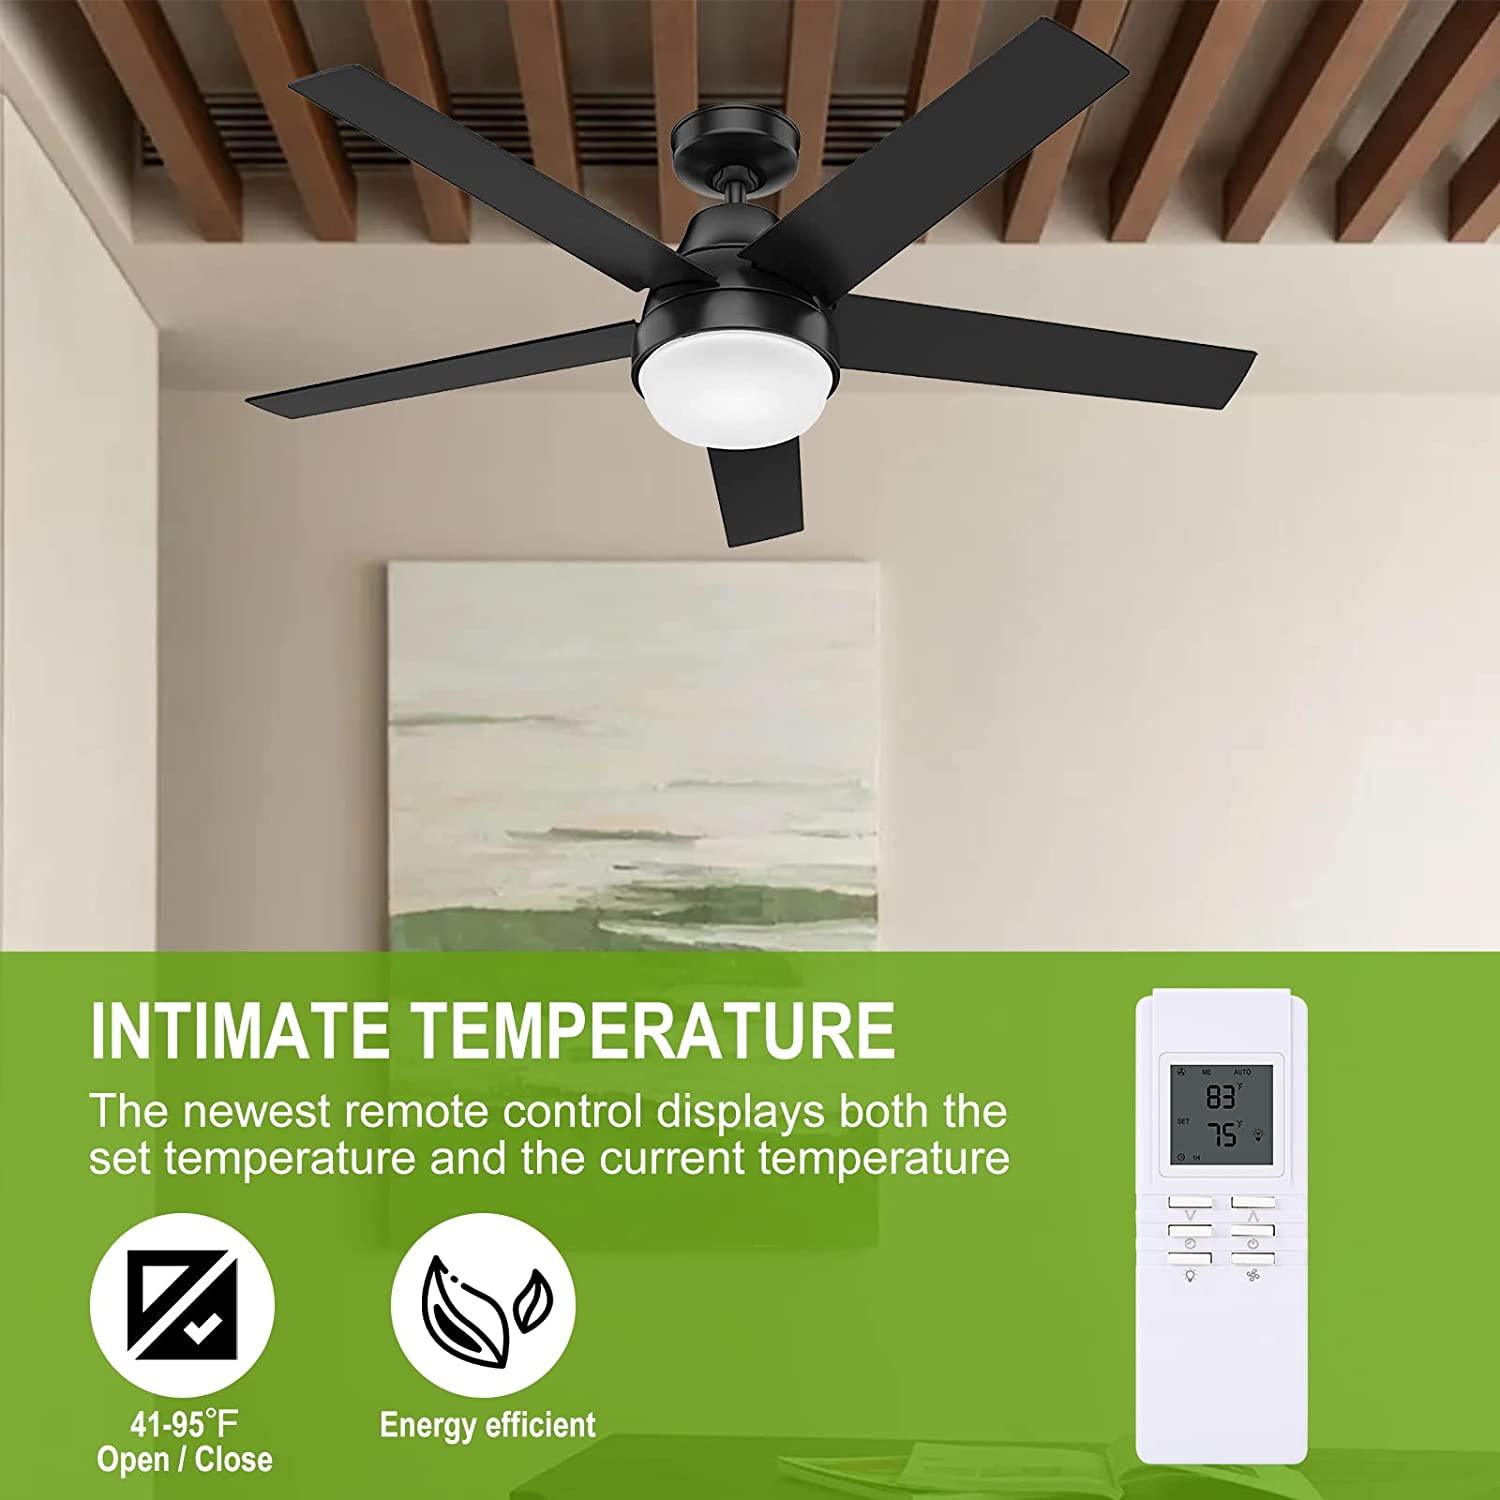 Ceiling Fan Remote Control Kit, Briidea 4-in-1 Universal Ceiling Fan Light Remote Kit with Temperature Control, Compatible with Hampton Bay, Hunter, Westinghouse, Honeywell Ceiling Fan Light - briidea